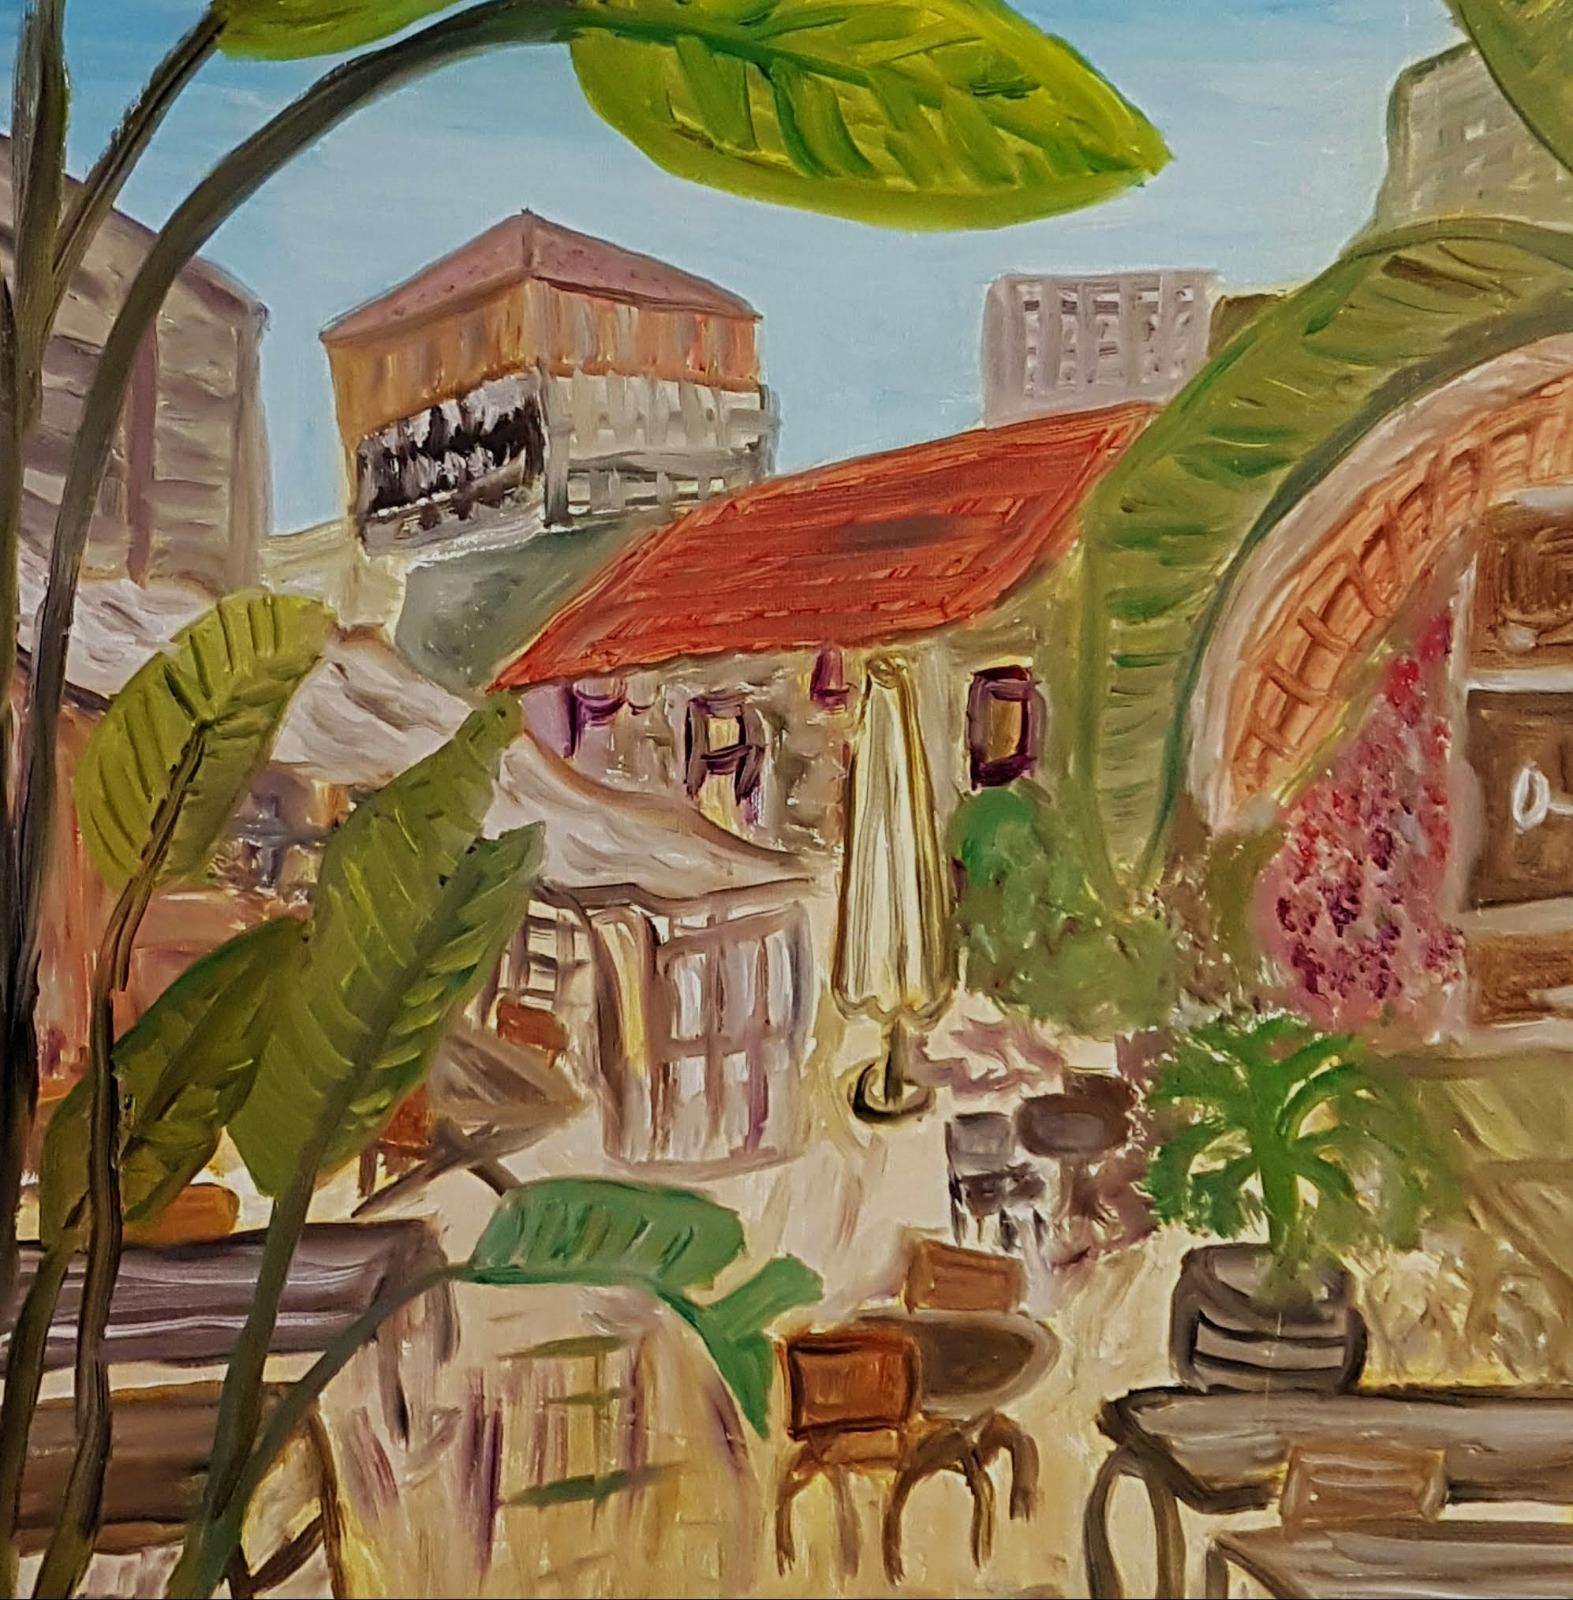 Oil on canvas 

Dondi Schwartz is an Israeli artist born in Canada in 1961 who lives and works in the Kibbutz Beeri, Negev, Israel. Schwartz studied art at the Avni School of Arts in Tel Aviv, The Kibbutz Workshop for Painting and Creative Writing